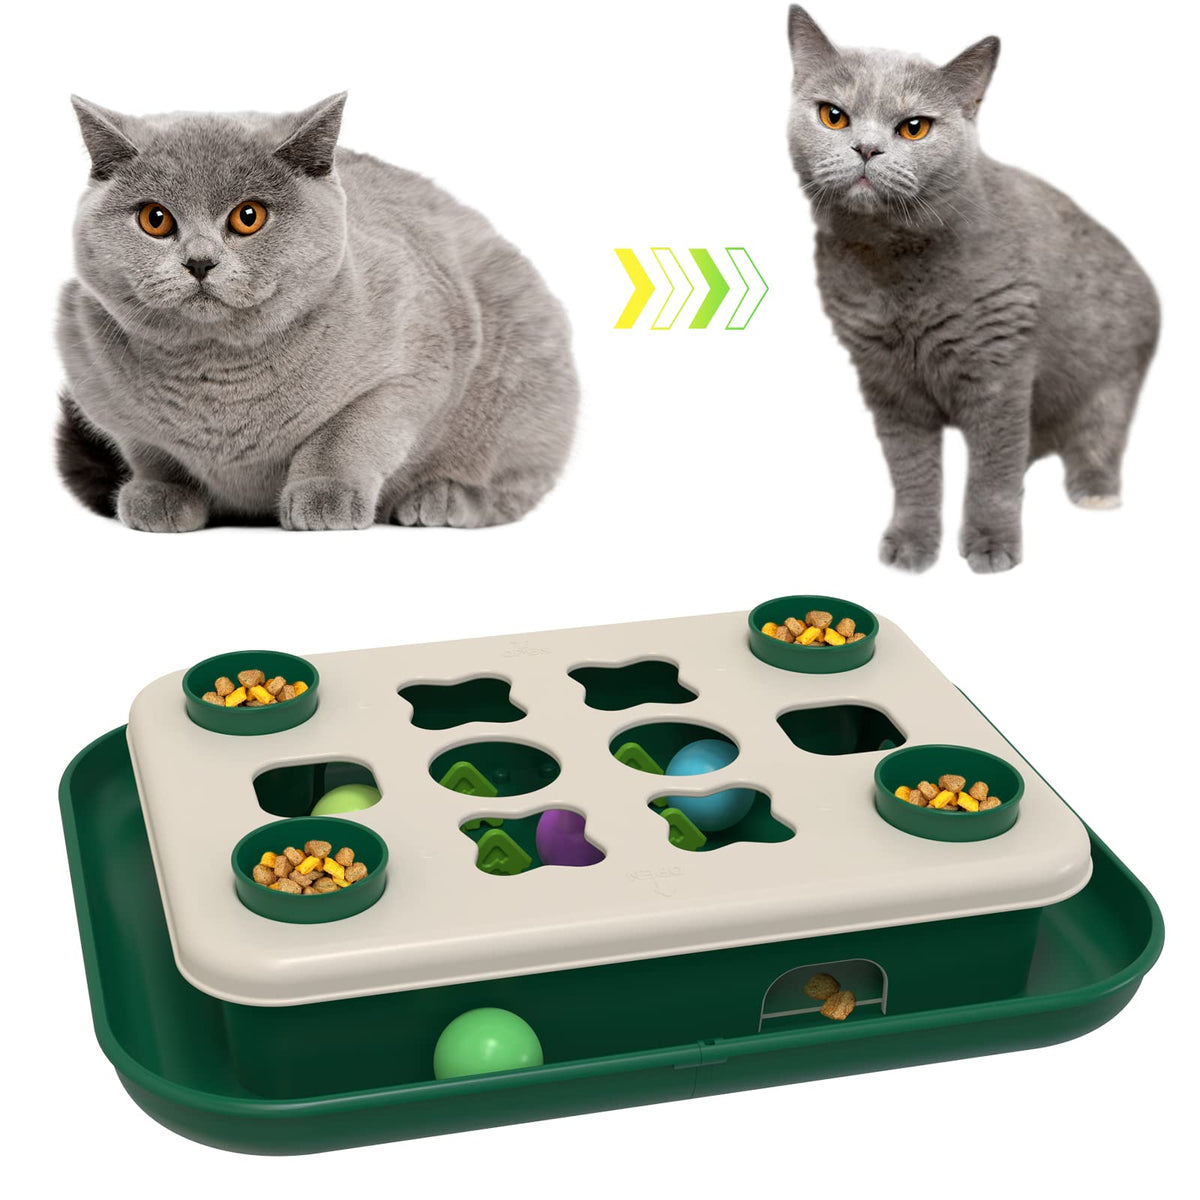 TACKDG 2nd Cats Treasure Chest Cat Puzzle Toy for Kitty Brain Stimulation Toys Kitten Food Treat Puzzles Feeder Dispenser Track Balls Mind Mental Stimulation Interactive Indoor